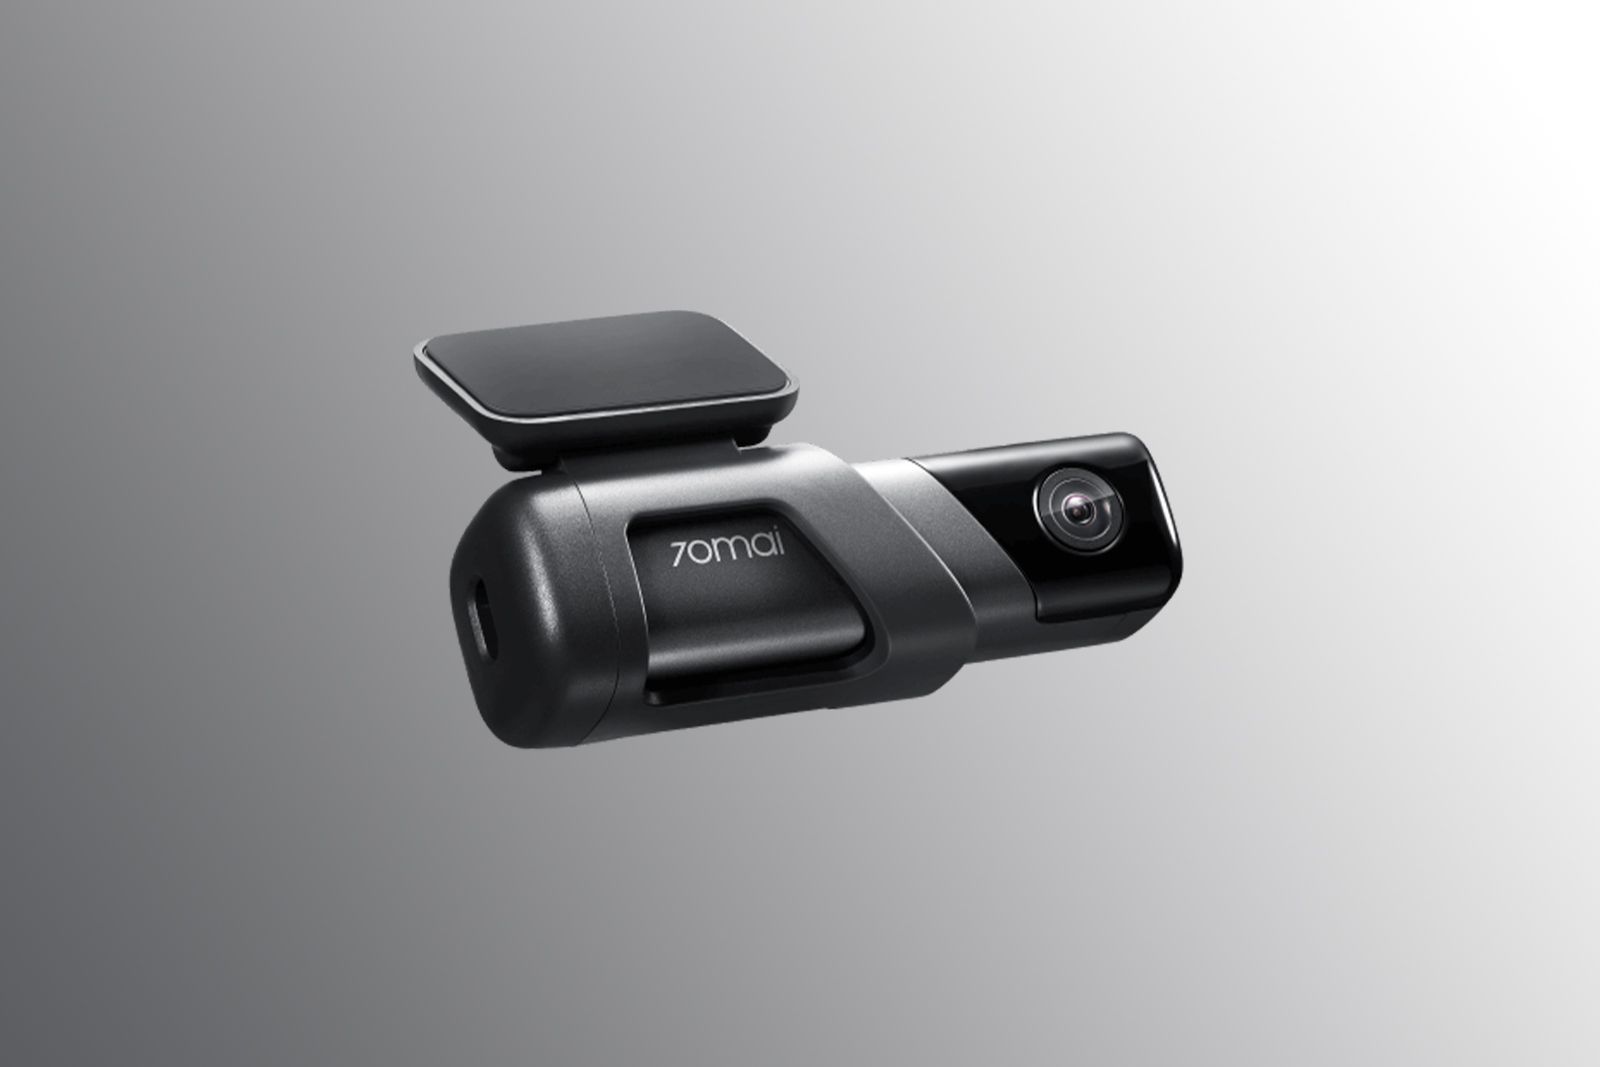 70mai Dash Cam M500 takes your dash cam video recording and monitoring capabilities to the next level photo 1